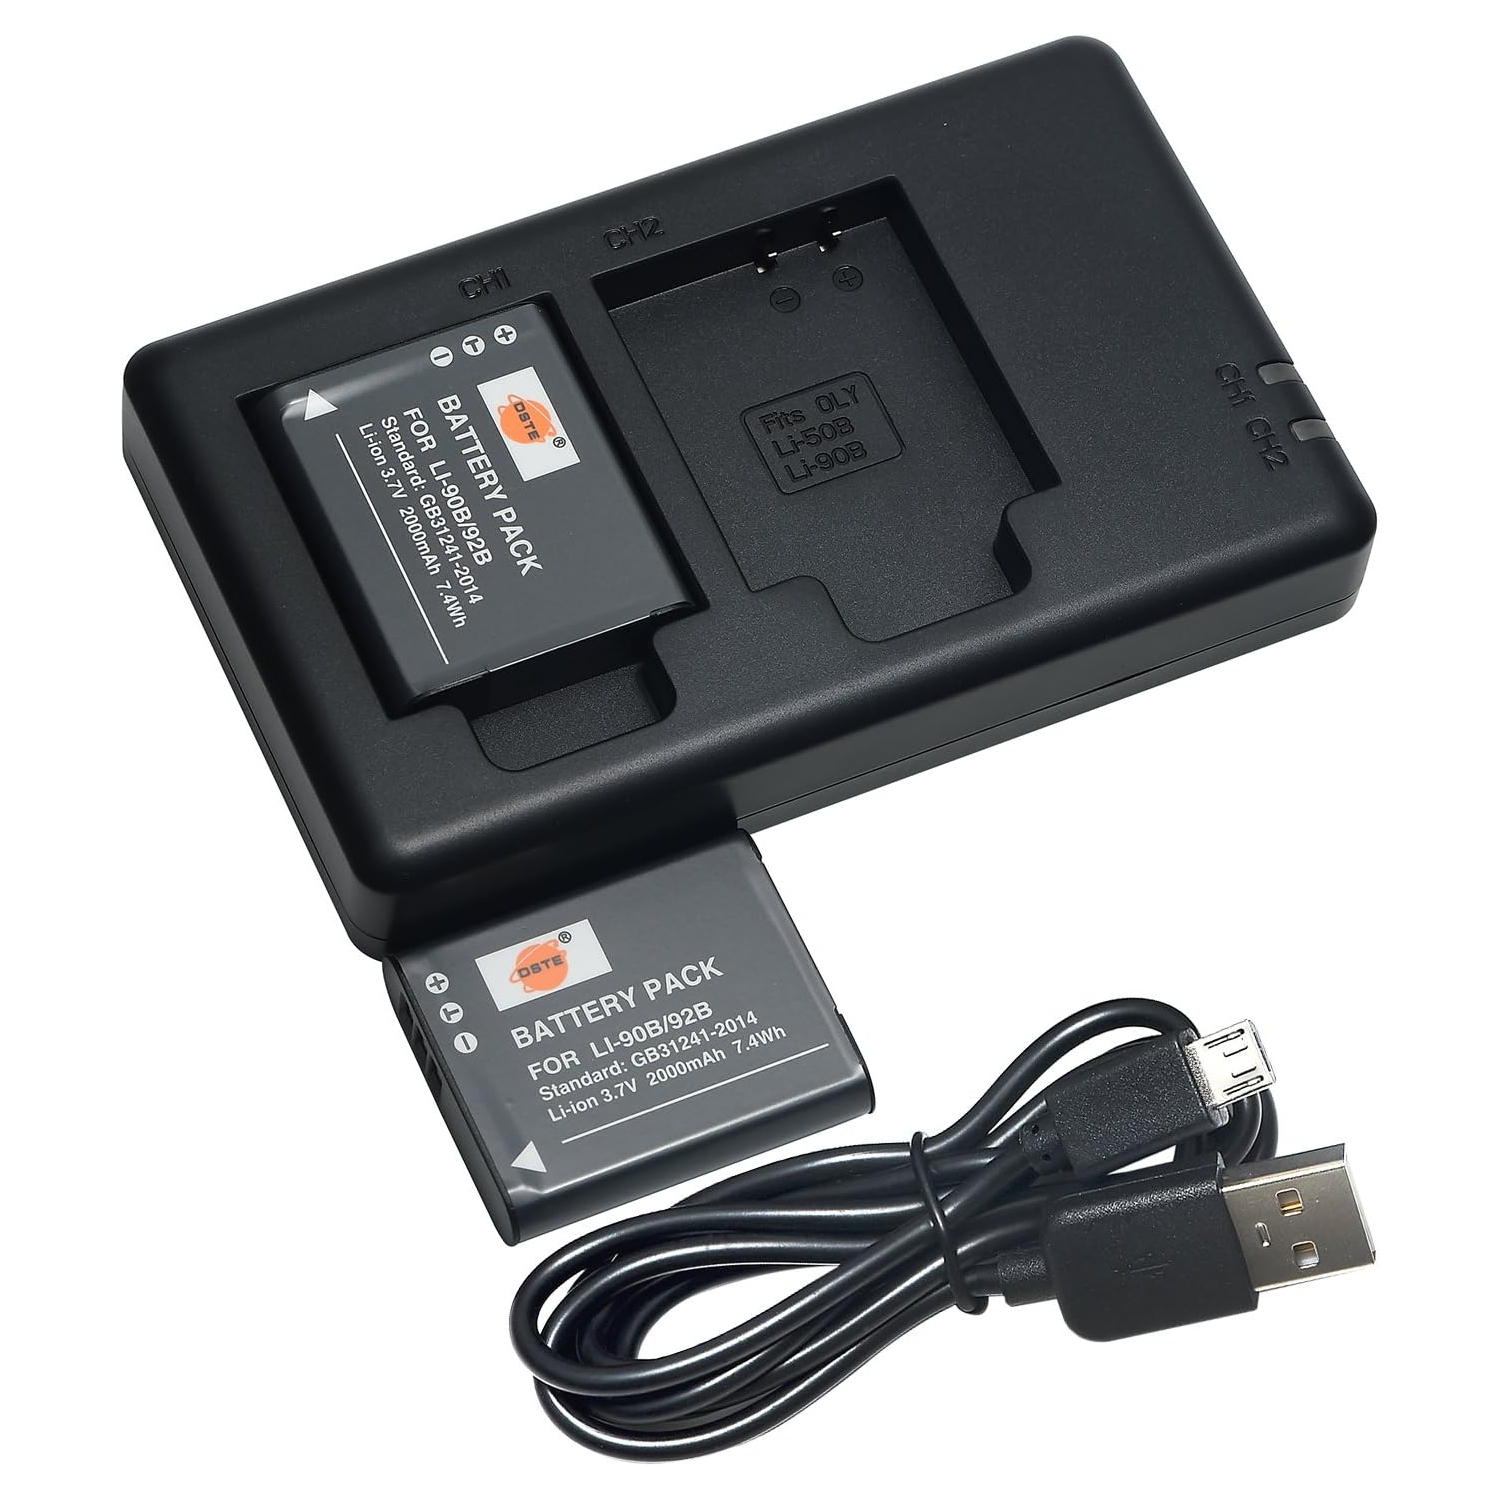 Replacement for 2X Li-90B Battery + Rapid Dual Battery Charger with Micro USB Cable for Olympus SH-50 iHS SH-60